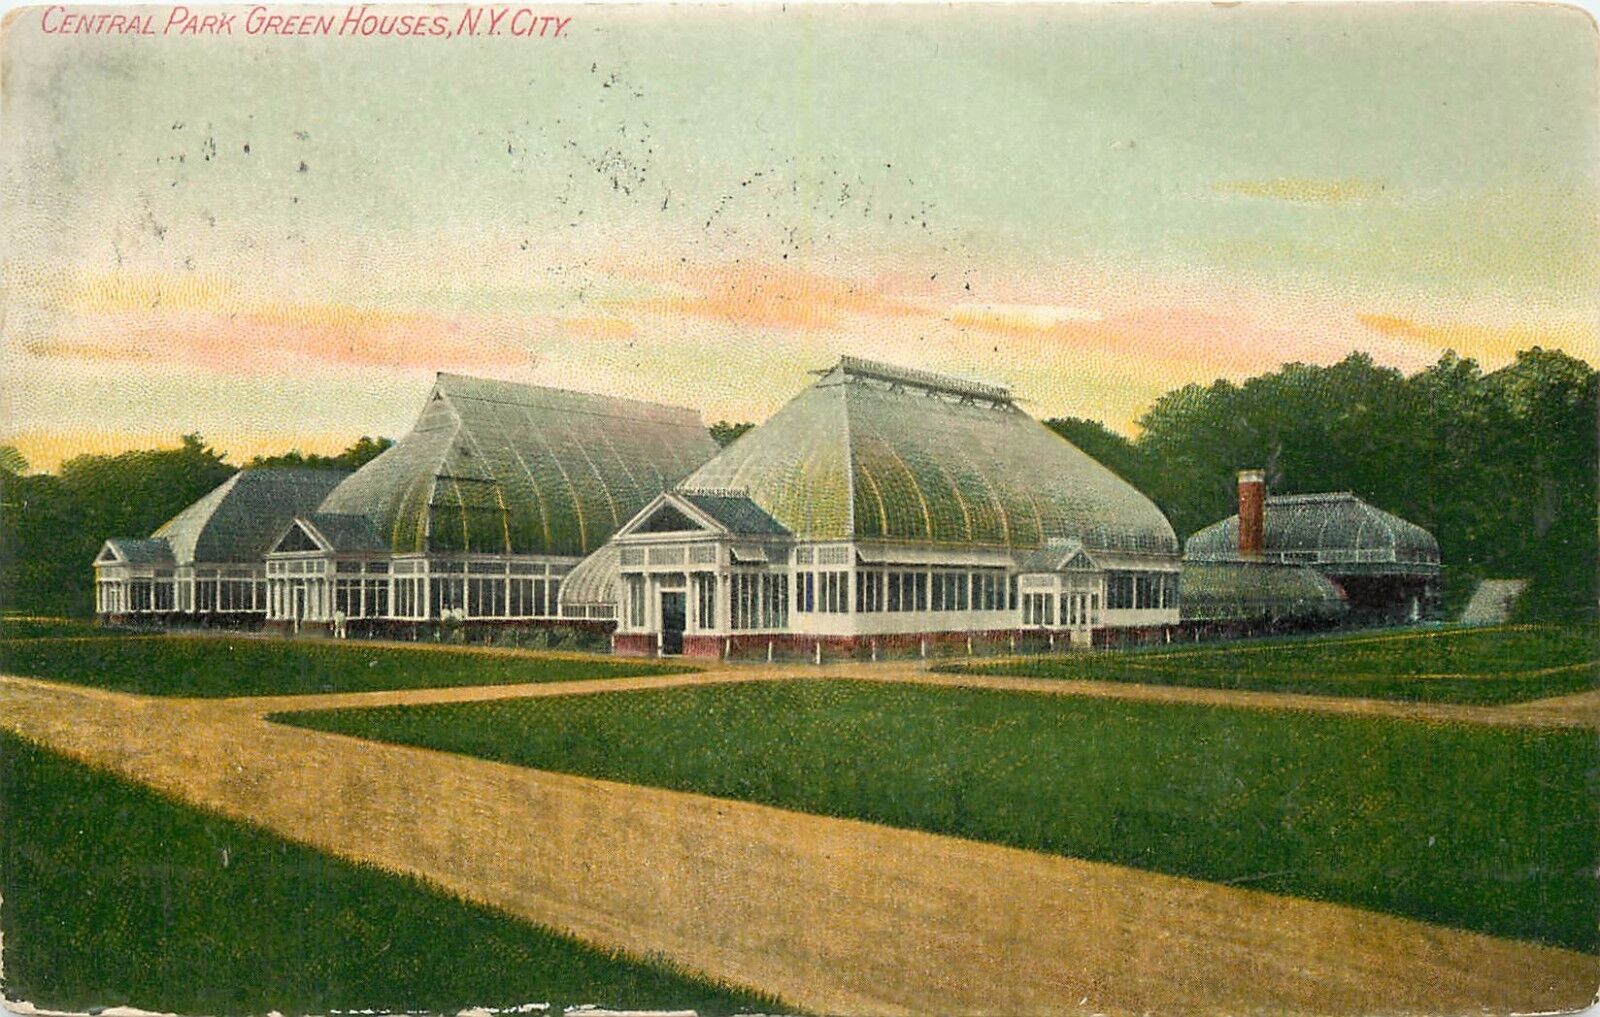 Central Park Green House New York NY pm 1911 missent stamp Postcard